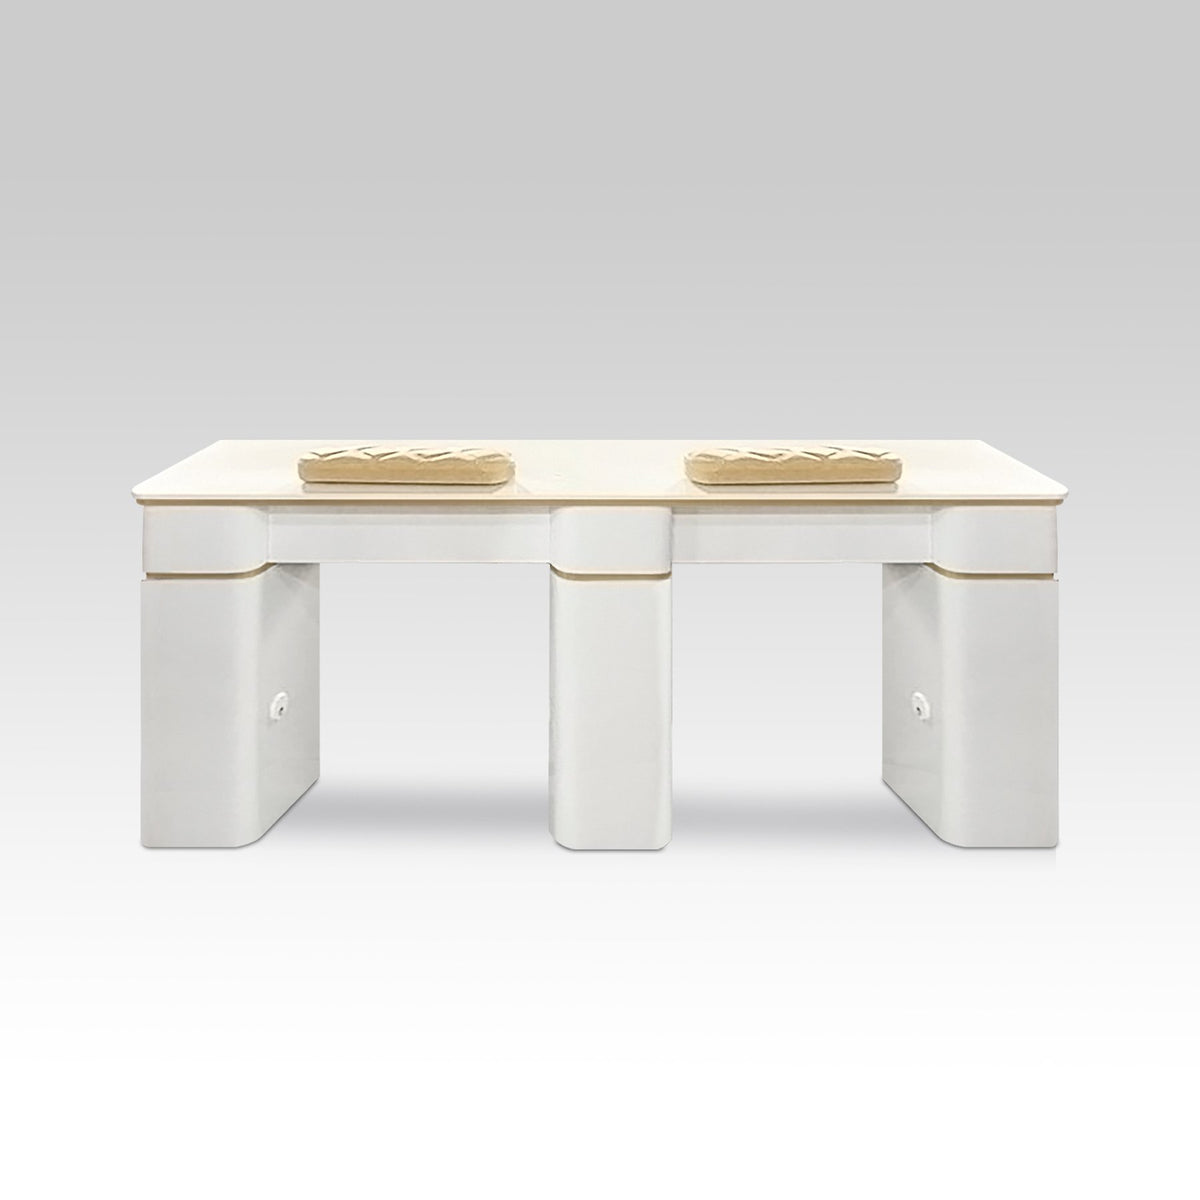 Kelly Double Table 70 Vent - White/Gold NO SHINY